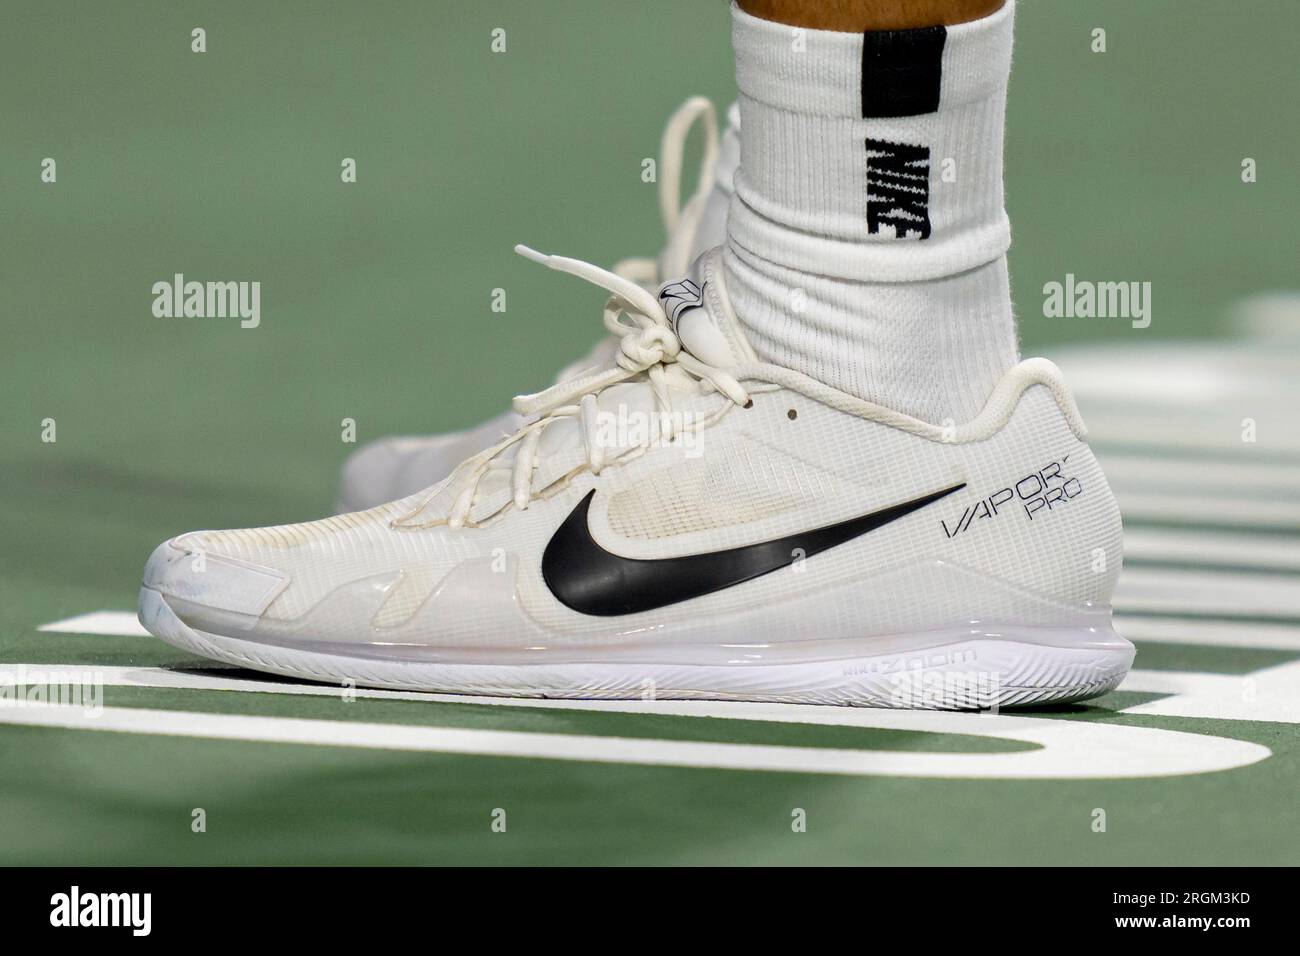 ON - AUGUST 09: Closeup of the Nike Vapour Pro shoes worn by Carlos Alcaraz of Spain during round match of the National Bank Open, part of the Hologic